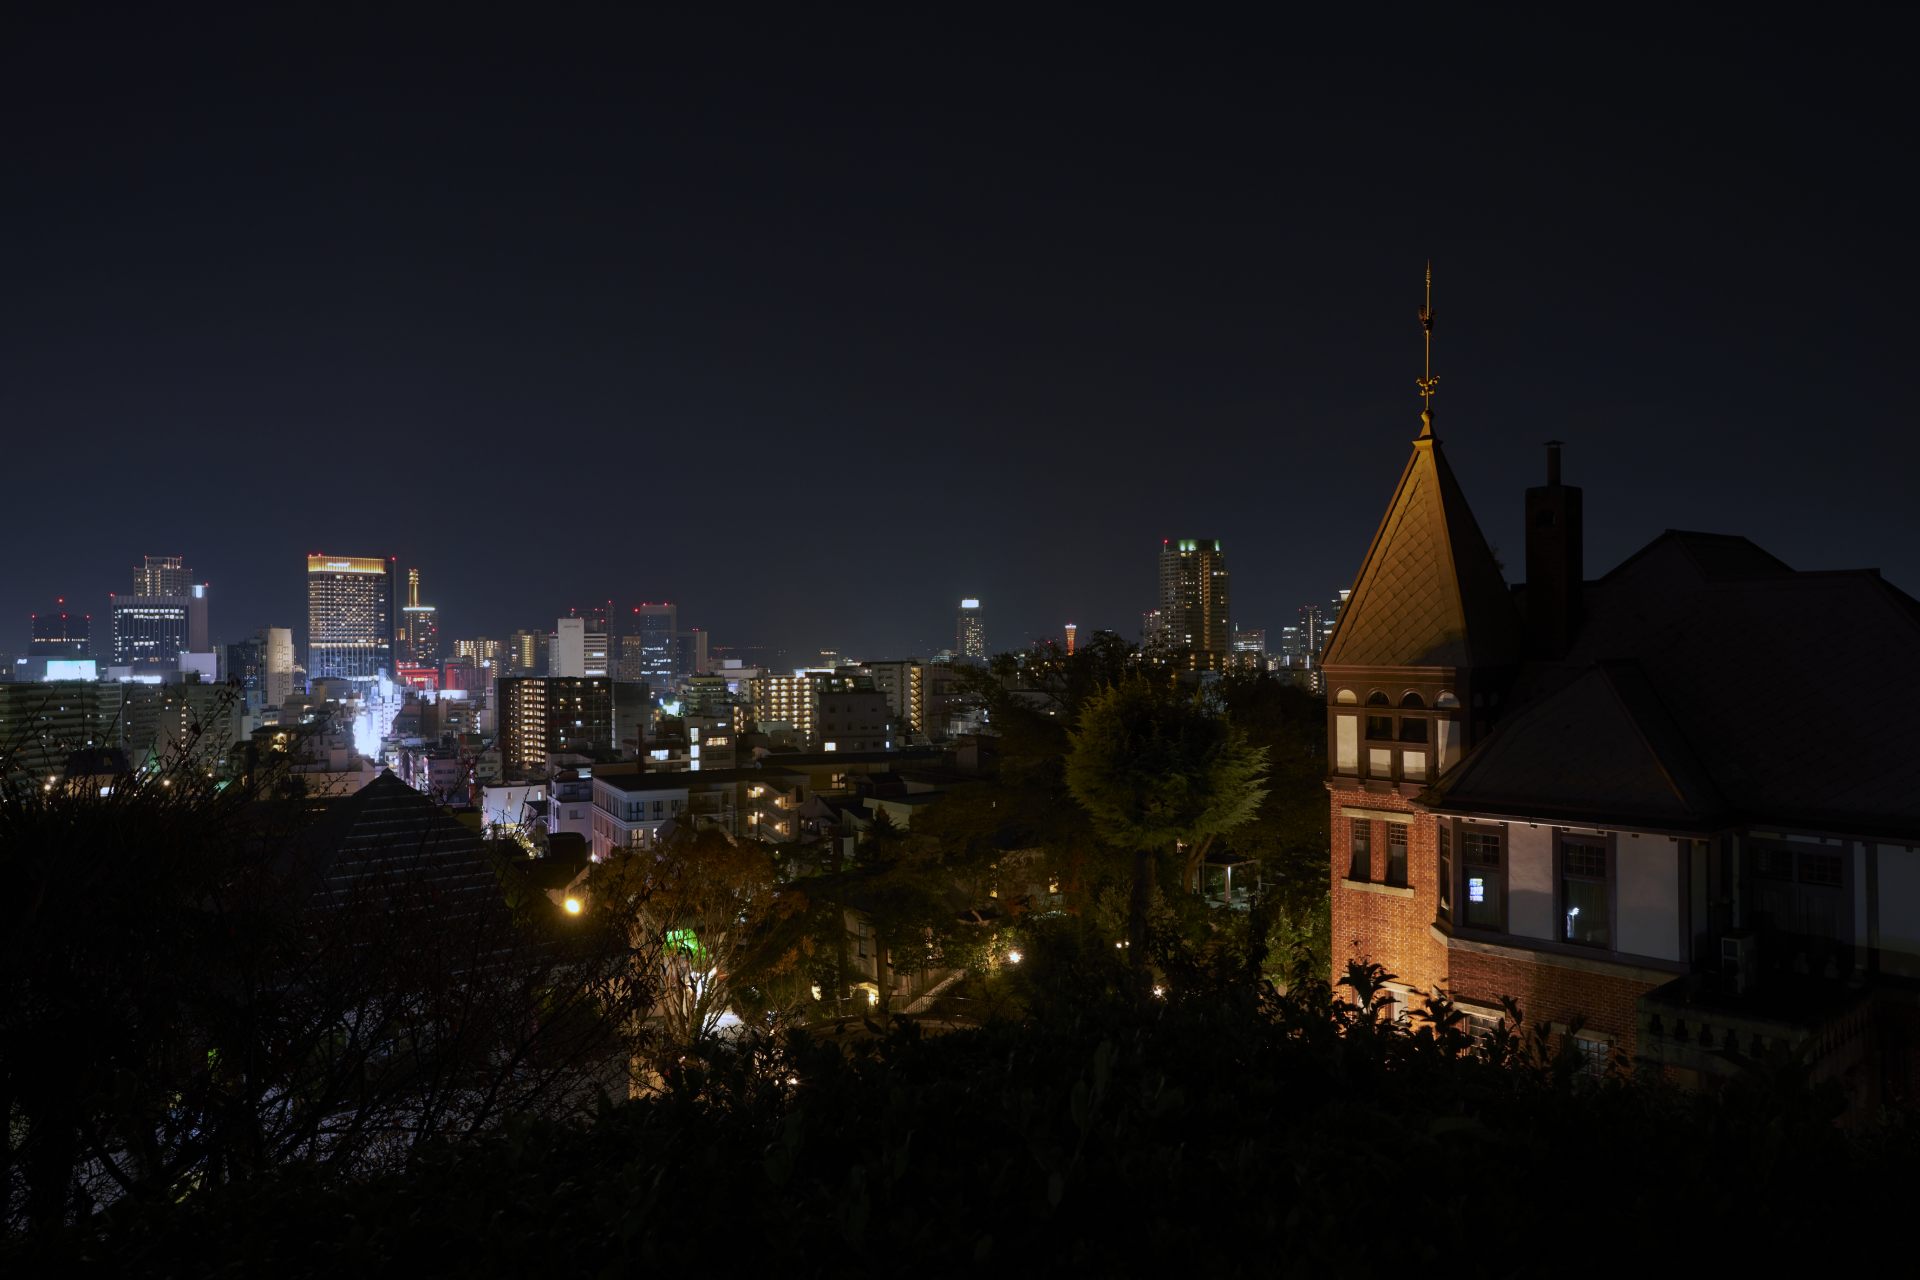 A sweeping view of Kobe at night as seen from the shrine grounds after dark. It truly is the shrine in the sky.